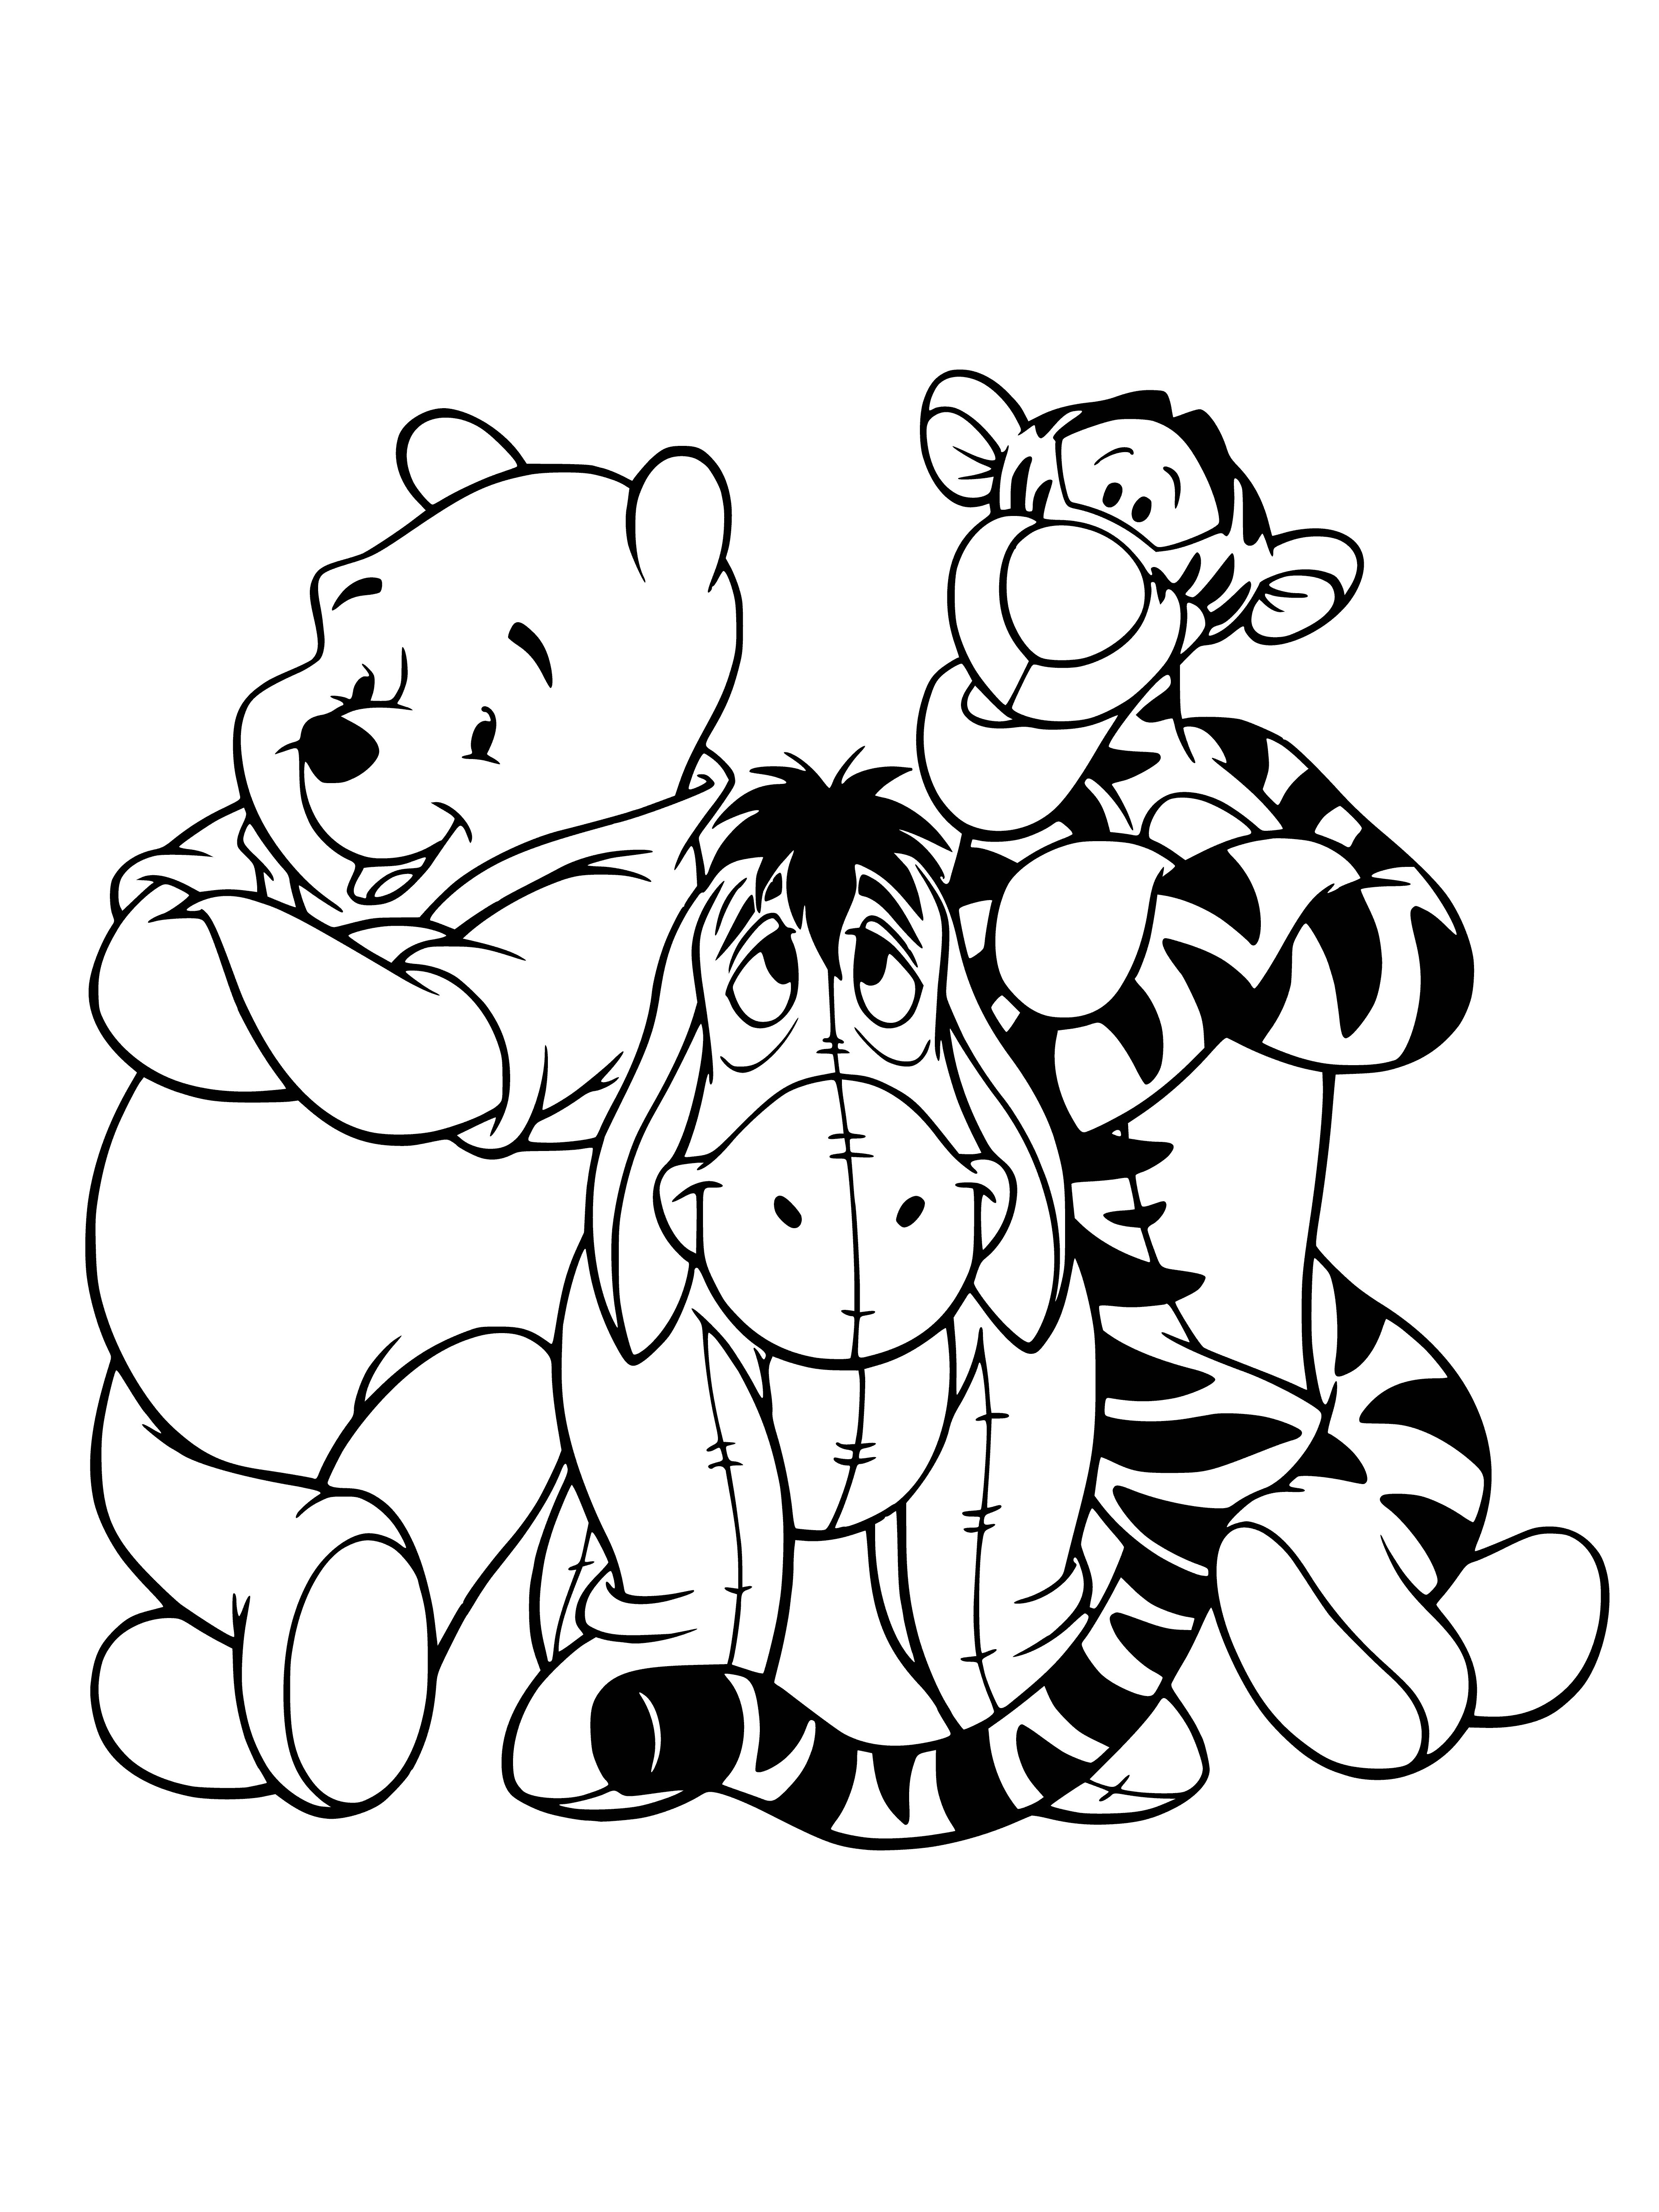 Winnie, Eeyore and Tigger coloring page